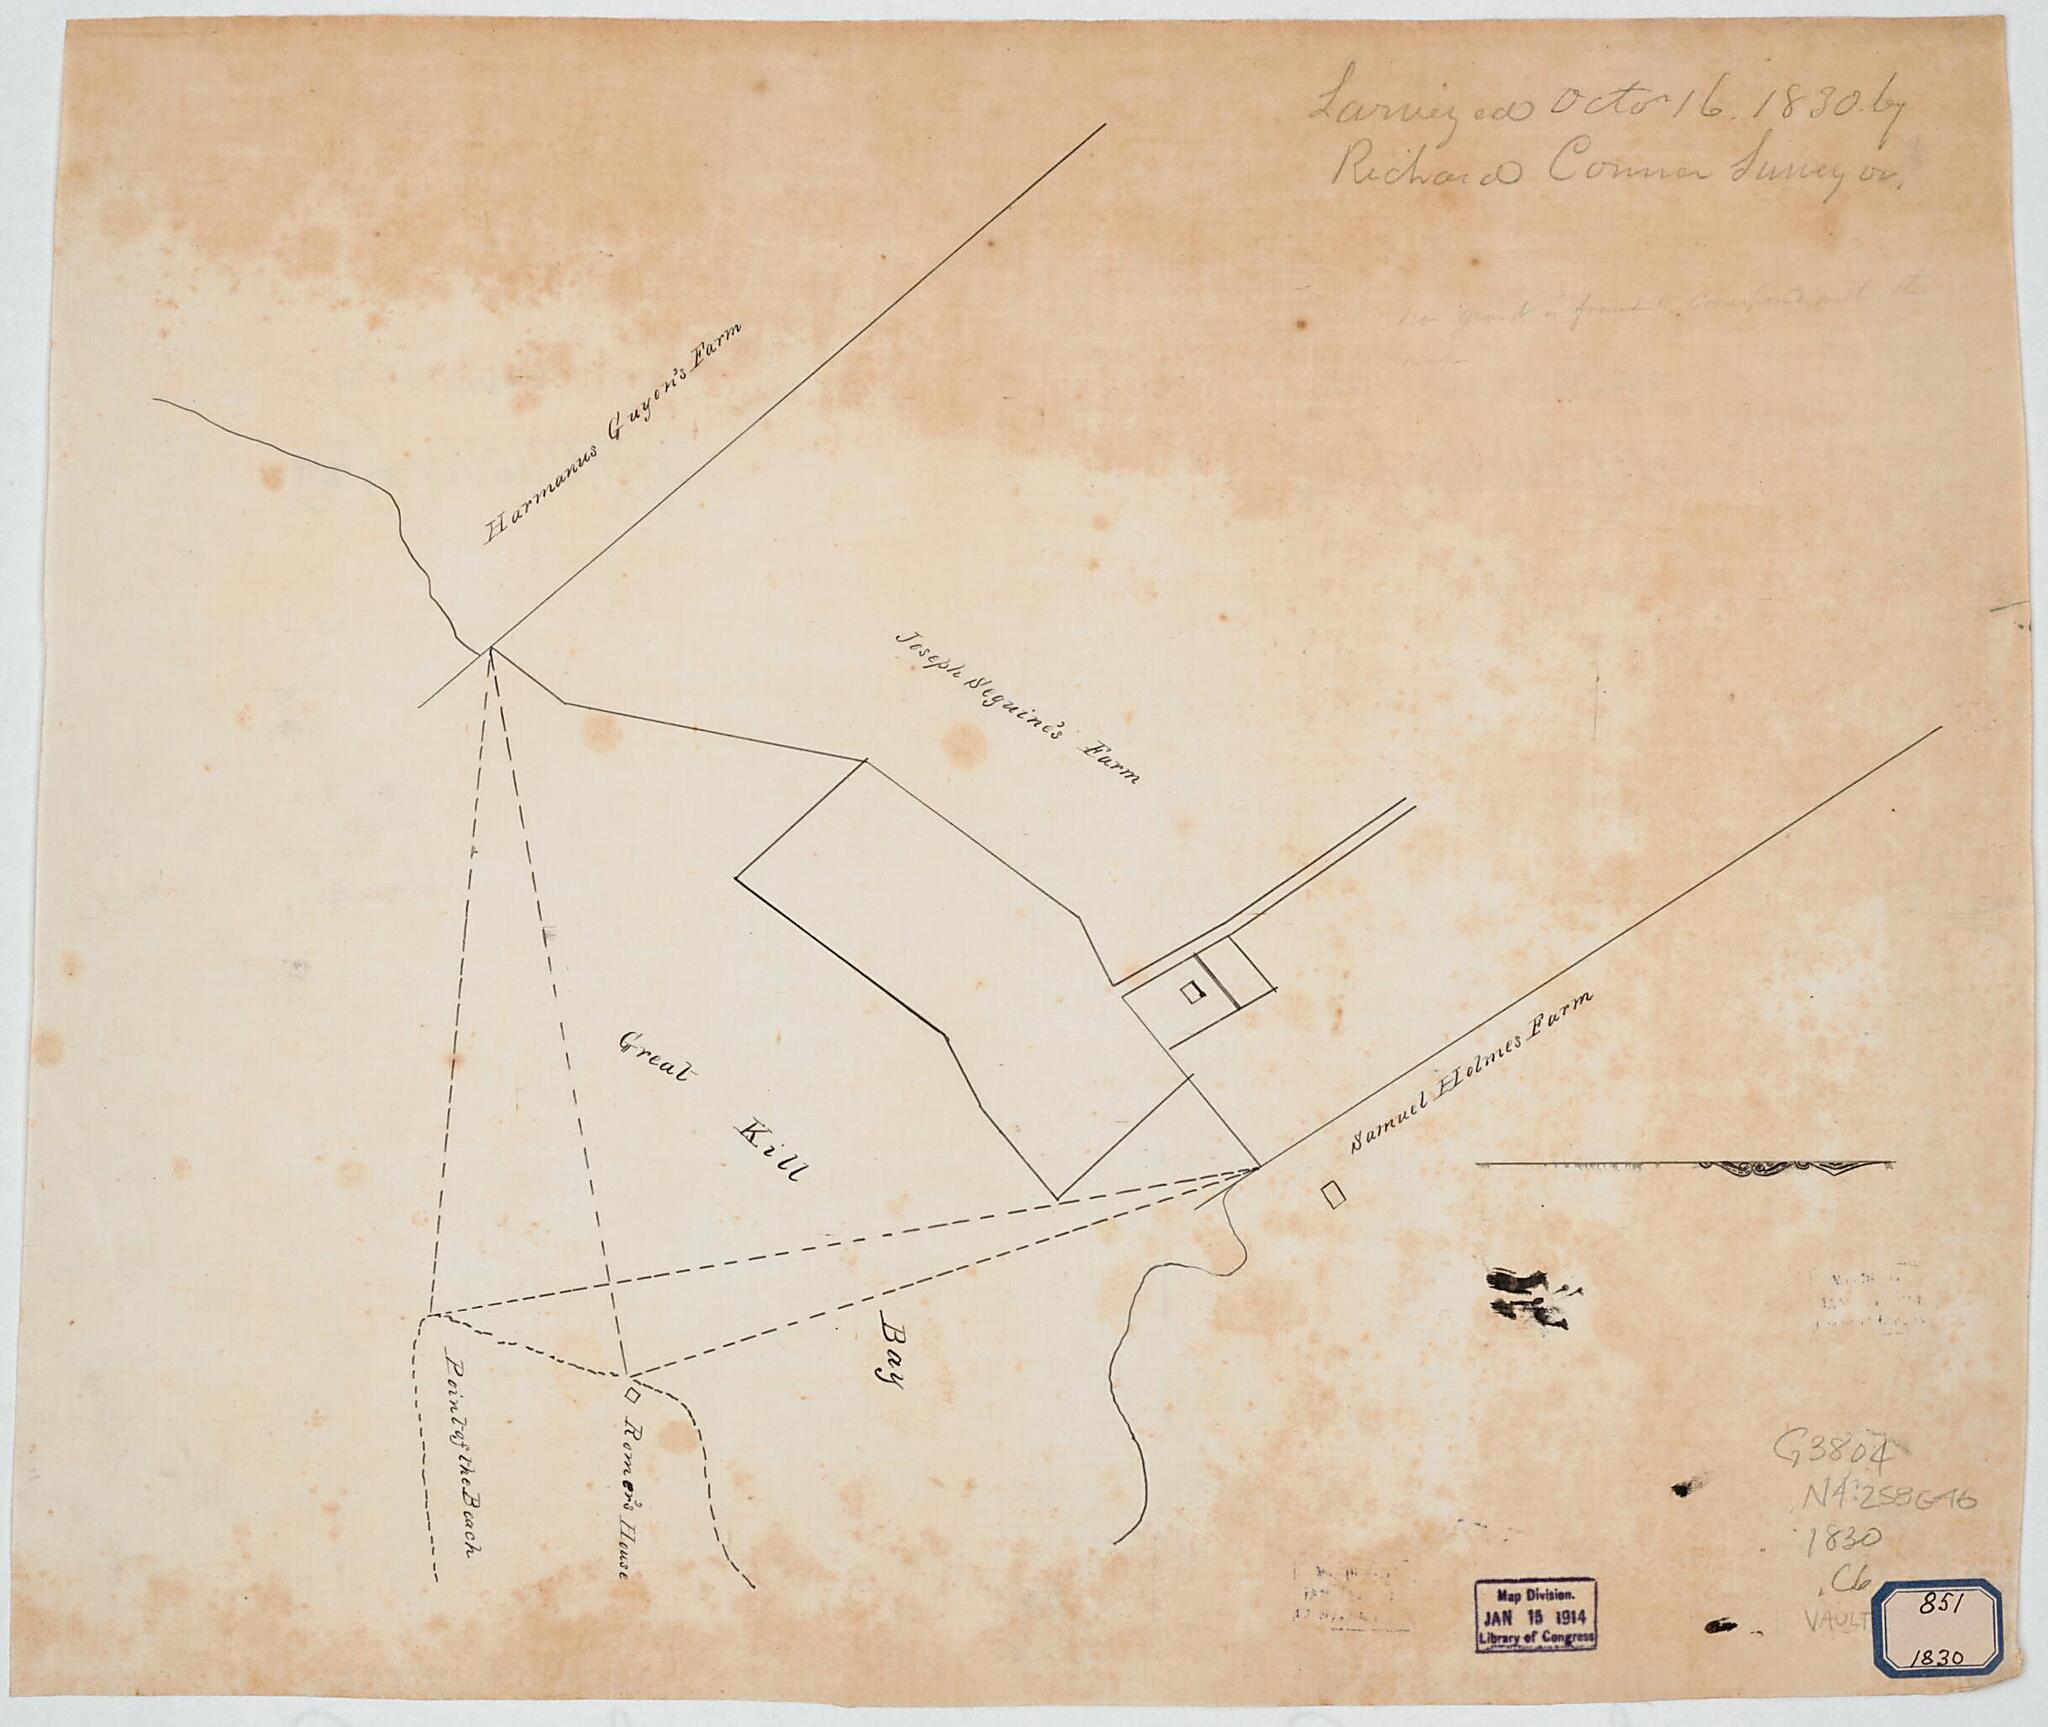 This old map of Survey of Great Kill Bay, Staten Island, New York from 1830 was created by Richard Conner,  U.S. Coast and Geodetic Survey in 1830